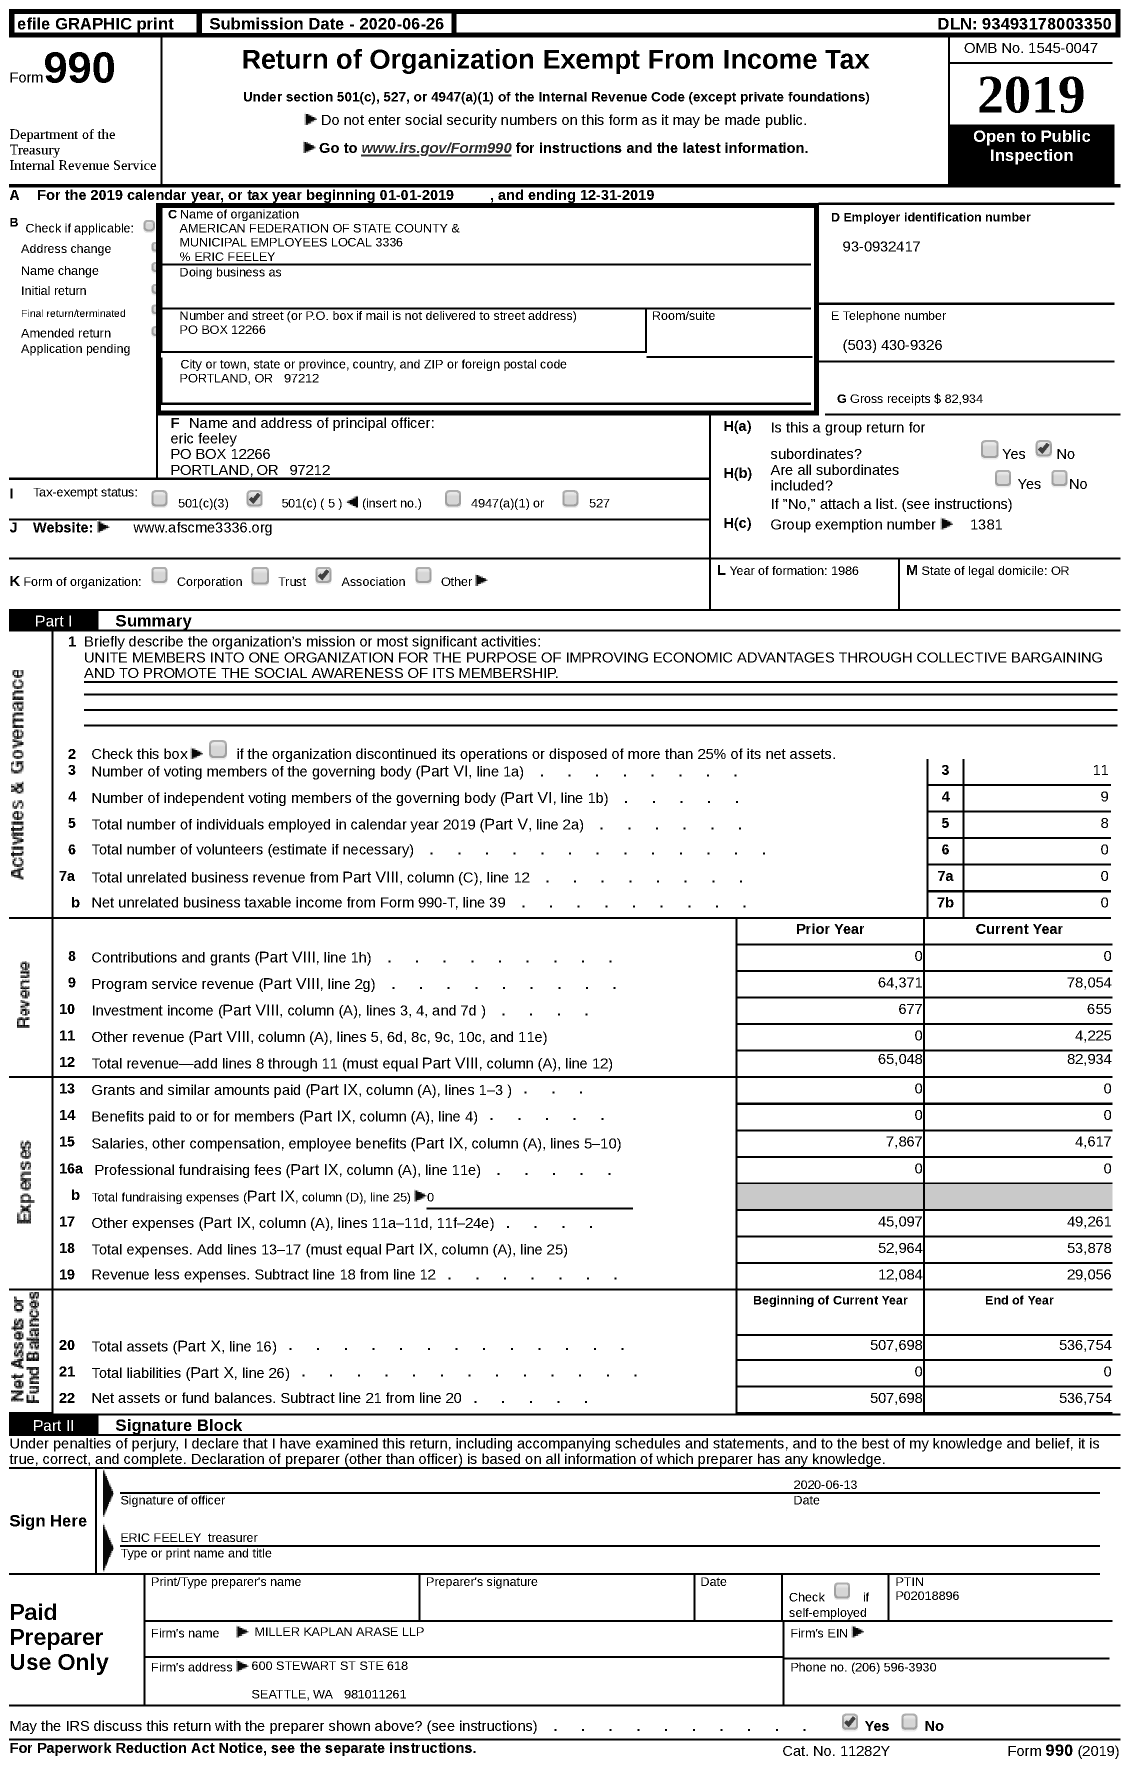 Image of first page of 2019 Form 990 for American Federation of State County & Municipal Employees - L3336or St Environmental Qual Emps